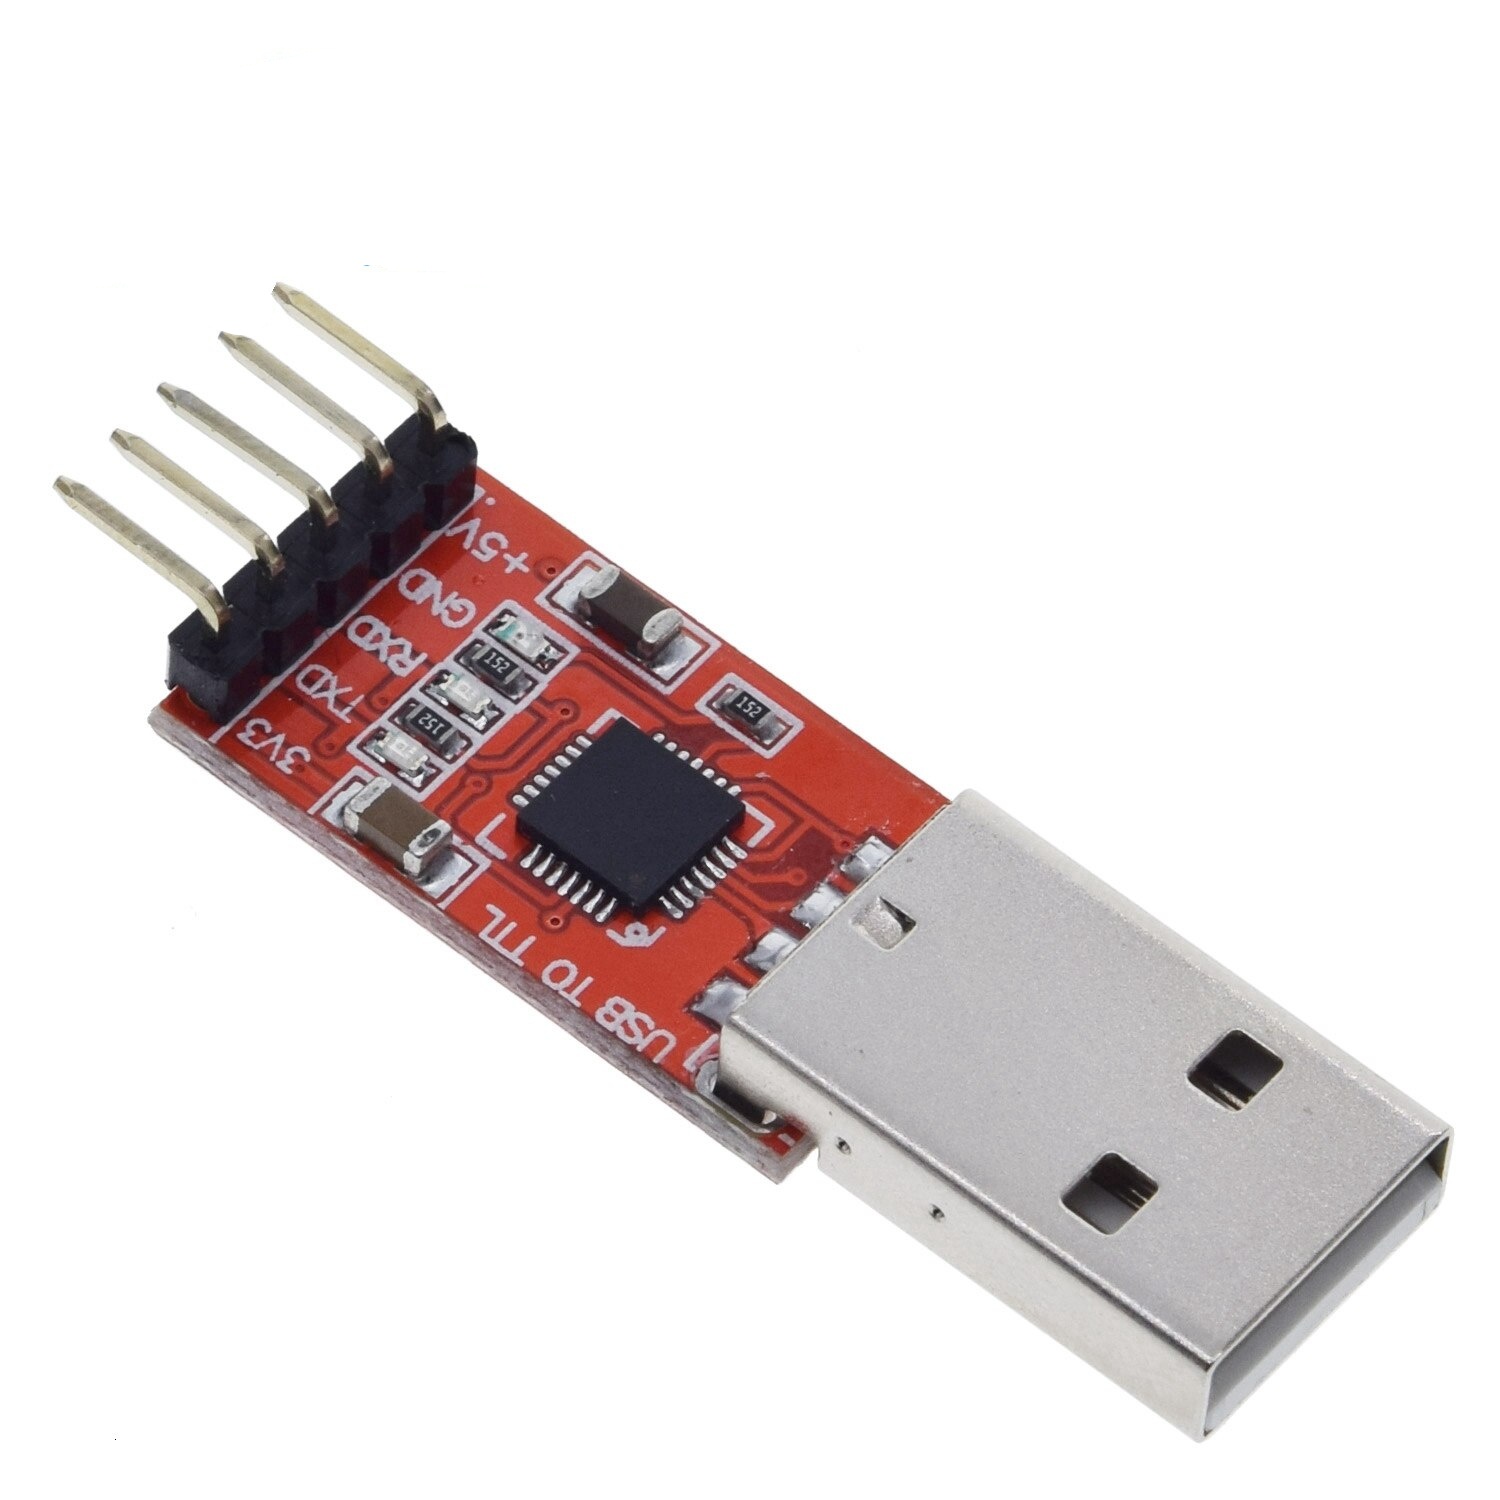 CP2102 Module USB to TTL Serial UART STC download cable PL2303